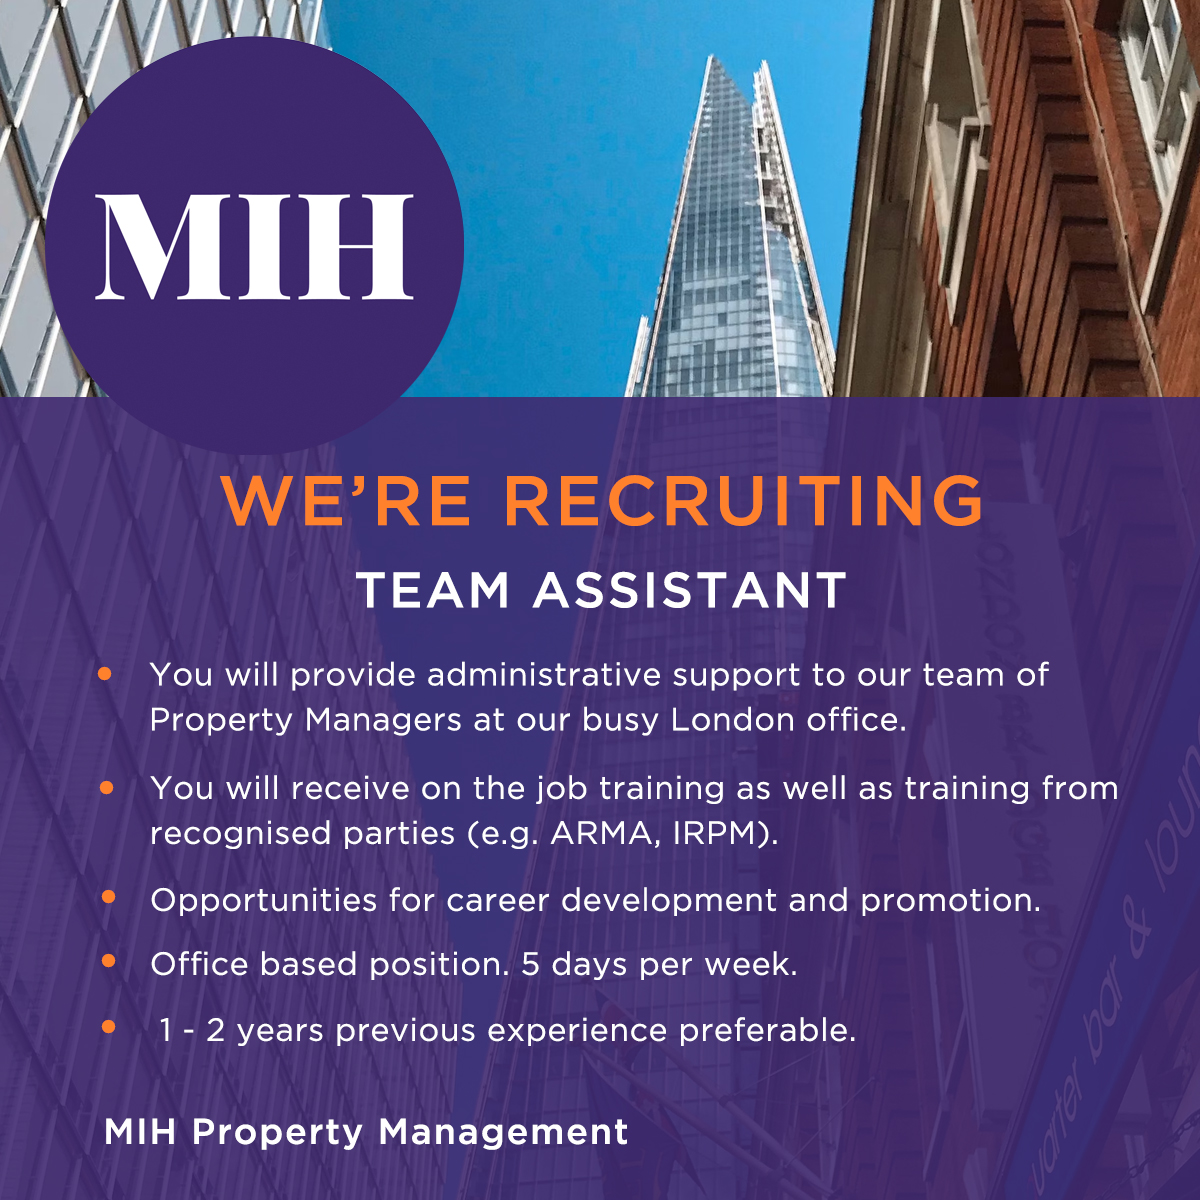 We are looking for a new TEAM ASSISTANT
Find out more  mihproperty.co.uk/join-us
(NO AGENCIES PLEASE)
#propertymanagement #propertymanager #recruitment #situationsvacant #jobsLondon #propertyassistant